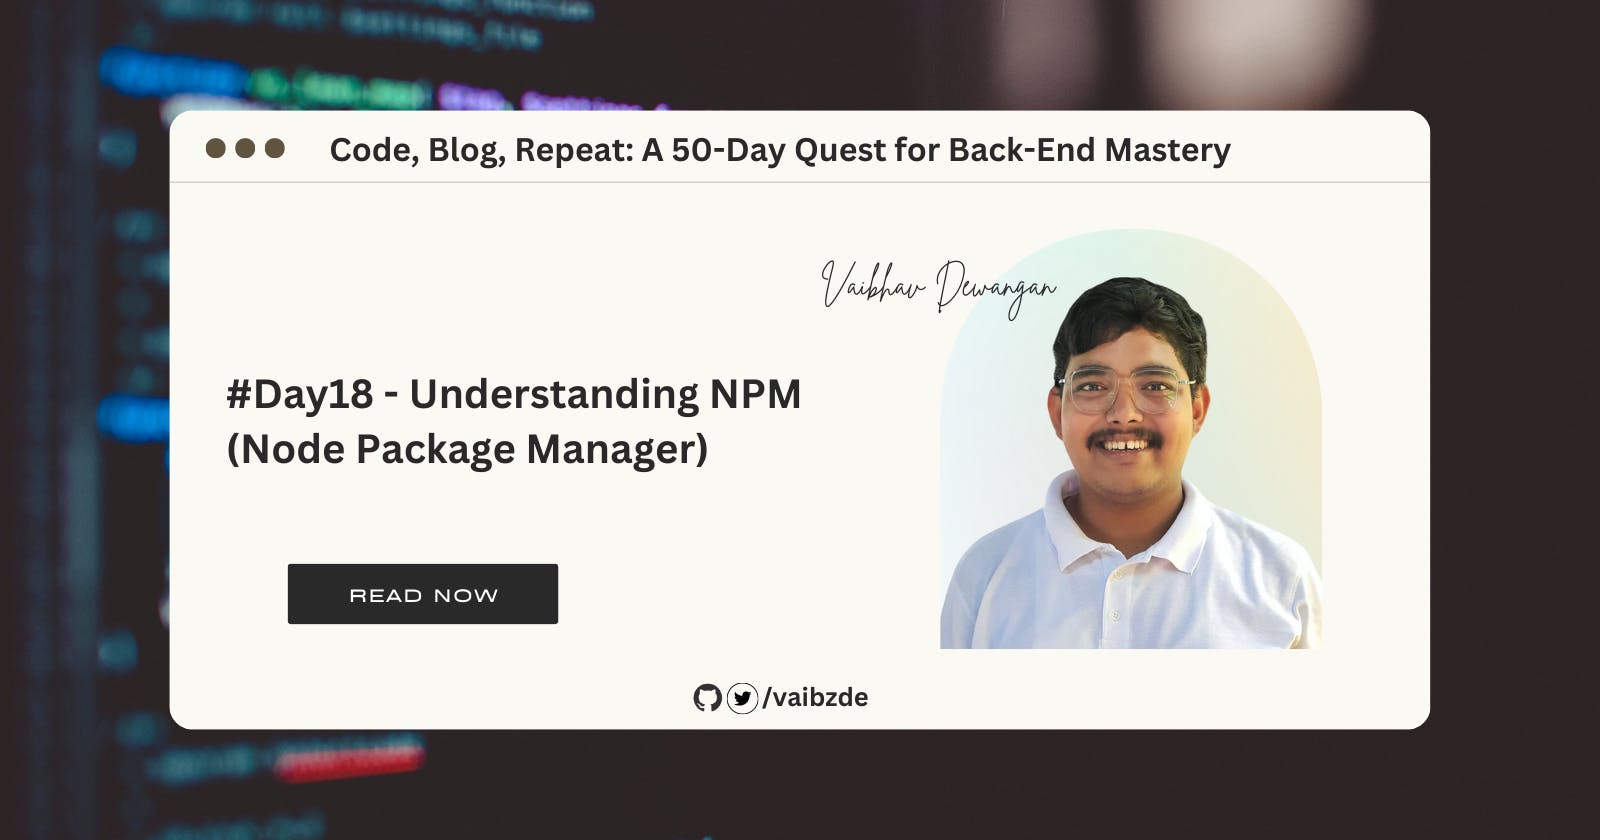 #Day18 - Understanding NPM (Node Package Manager)